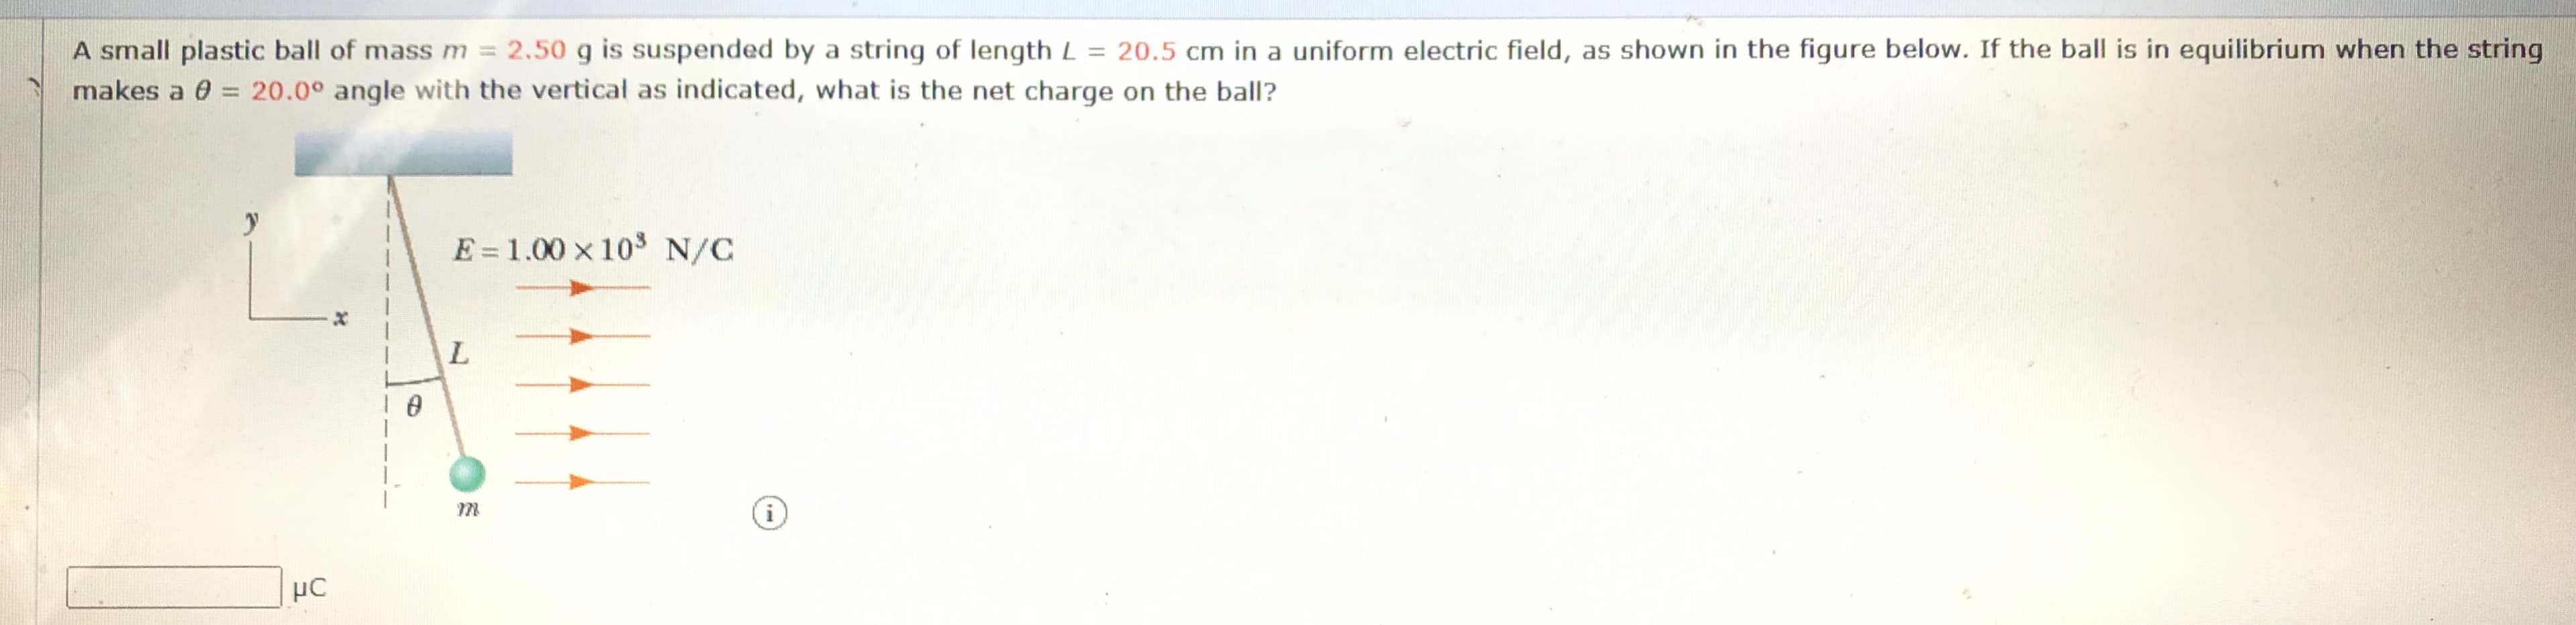 A small plastic ball of mass m = 2.50 g is suspended by a string of length L = 20.5 cm in a uniform electric field, as shown in the figure below. If the ball is in equilibrium when the string
makes a 0 = 20.0° angle with the vertical as indicated, what is the net charge on the ball?
E = 1.00 x 103 N/C
i
